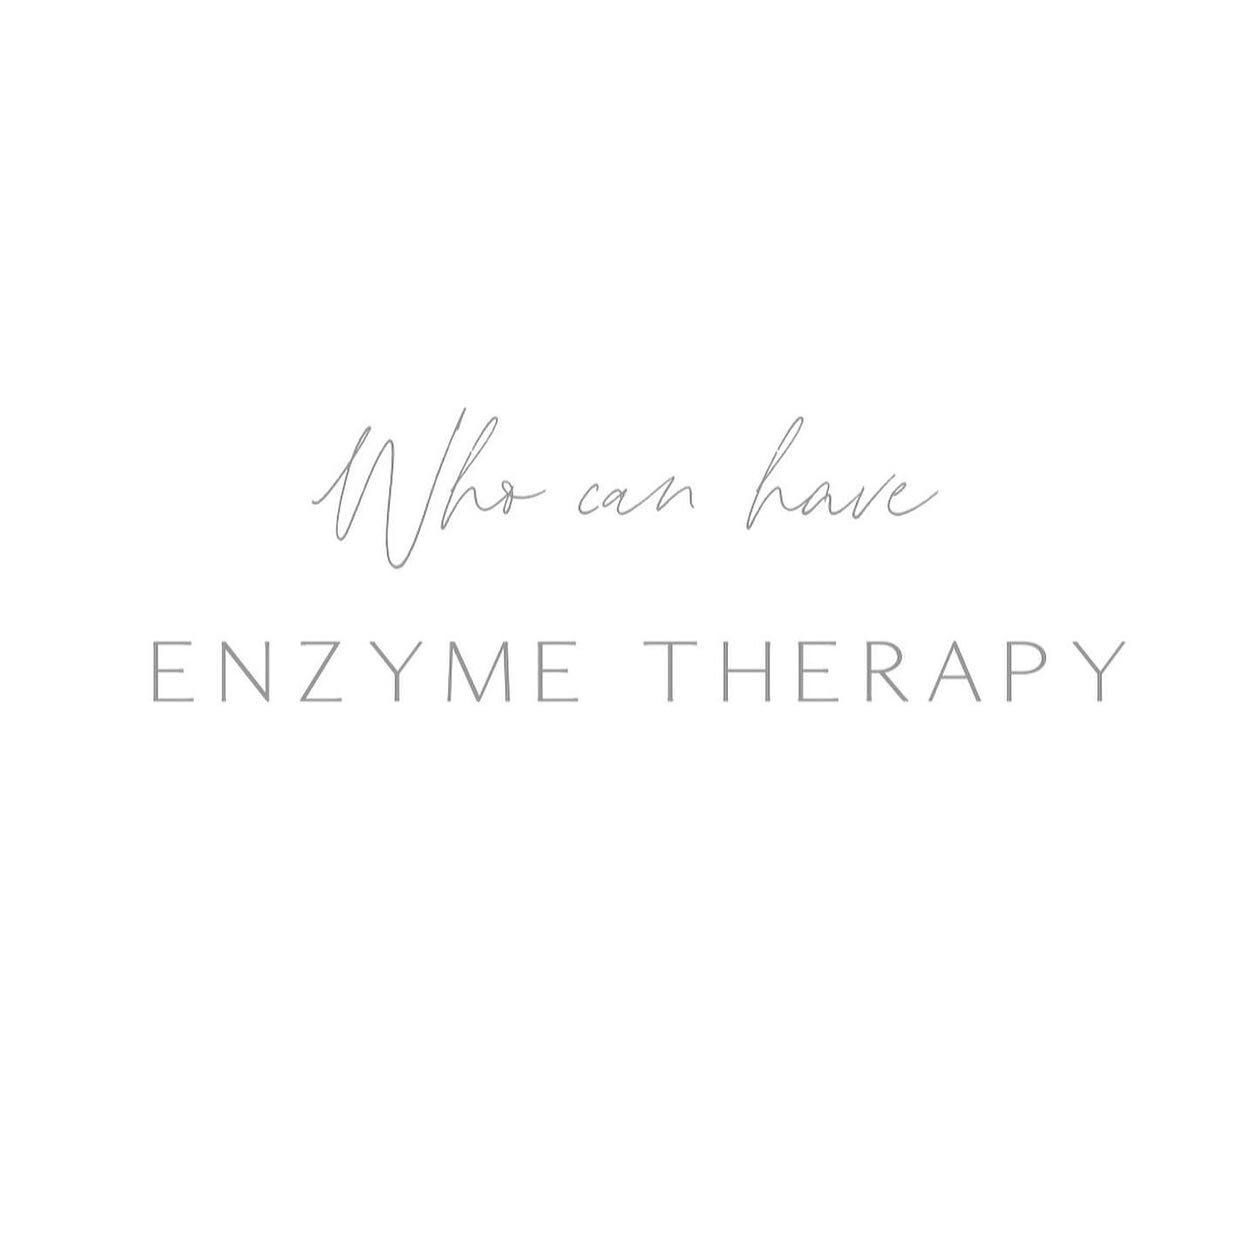 &bull; ENZYME THERAPY &bull; 

A treatment to create optimal cellular functioning, prevent ageing, heal acne and other inflammatory skin conditions. This treatment gives instant lifting and plumping but the most impressive effect it has on the skin i